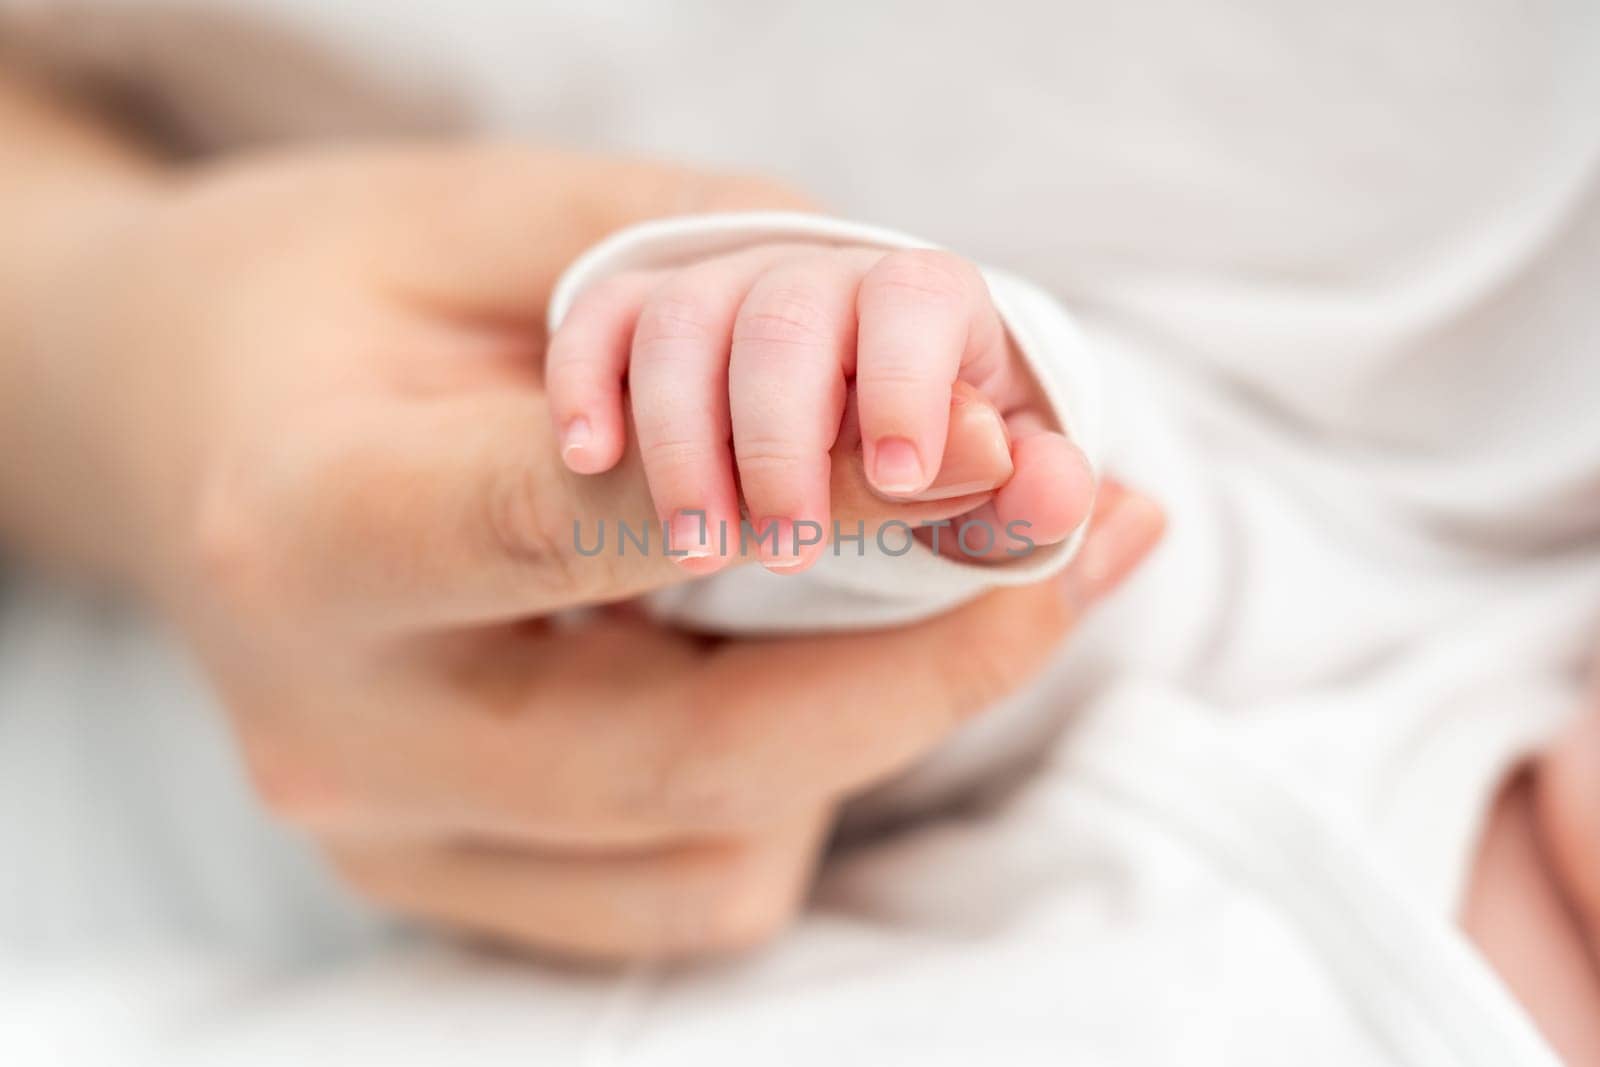 Close-up reveals the intimate connection as sleeping newborn tenderly holds onto mother's finger